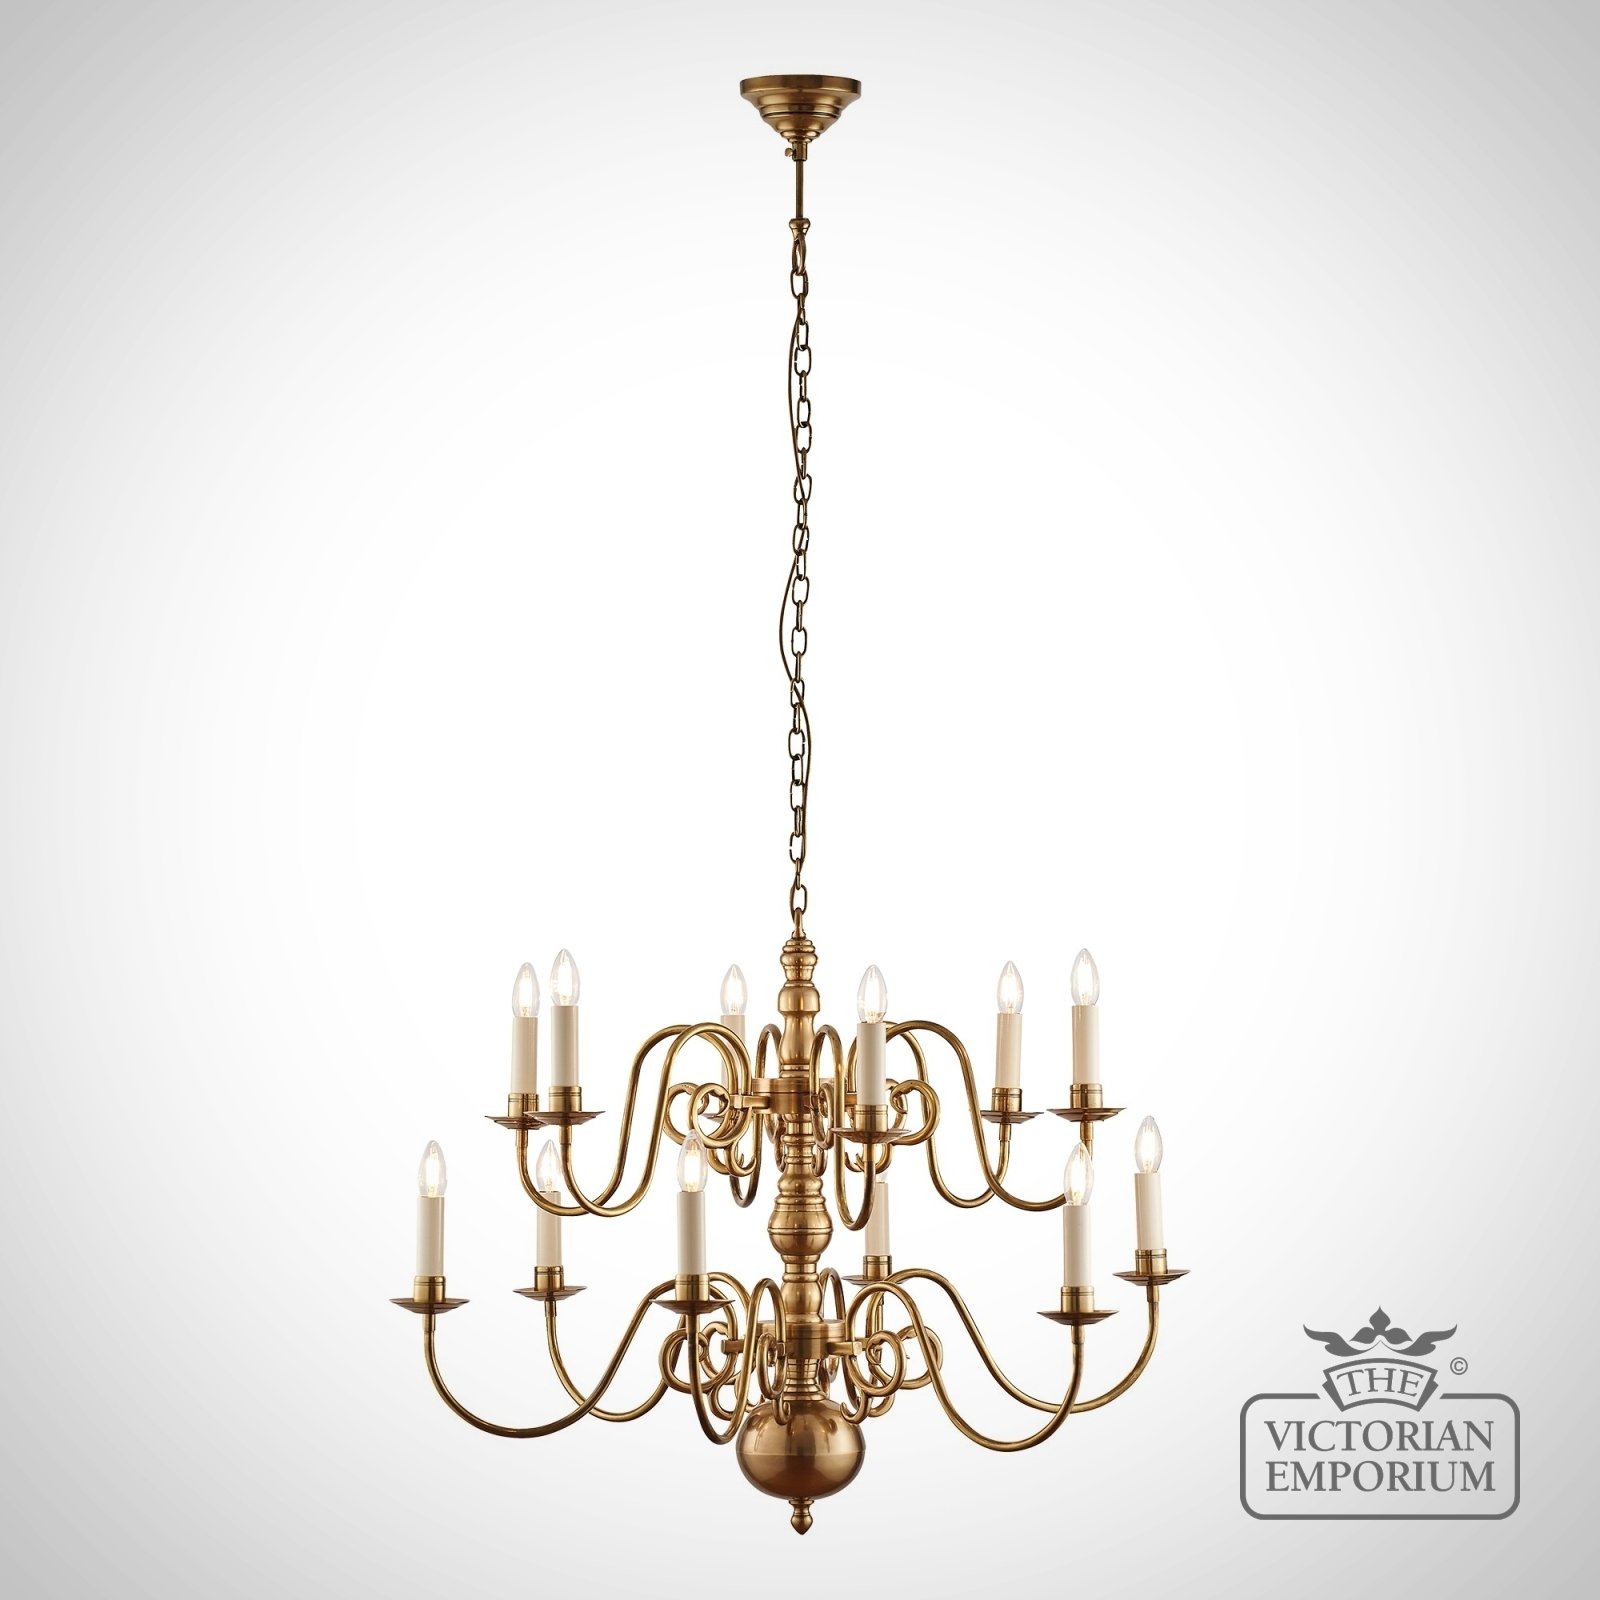 Chamberlain 12 Light Ceiling Chandelier With Or Without Shades